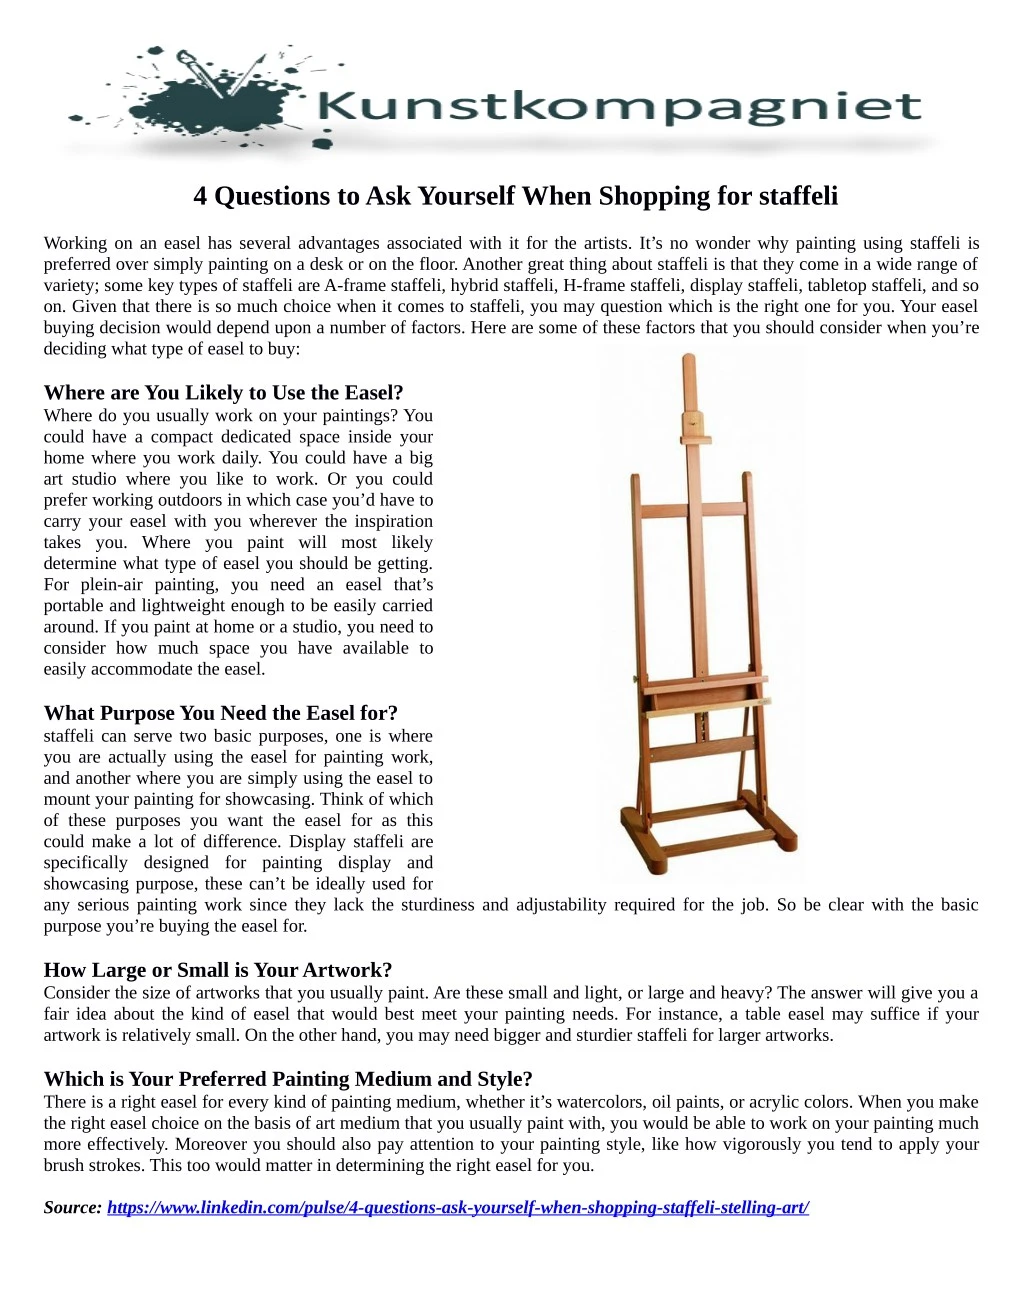 4 questions to ask yourself when shopping